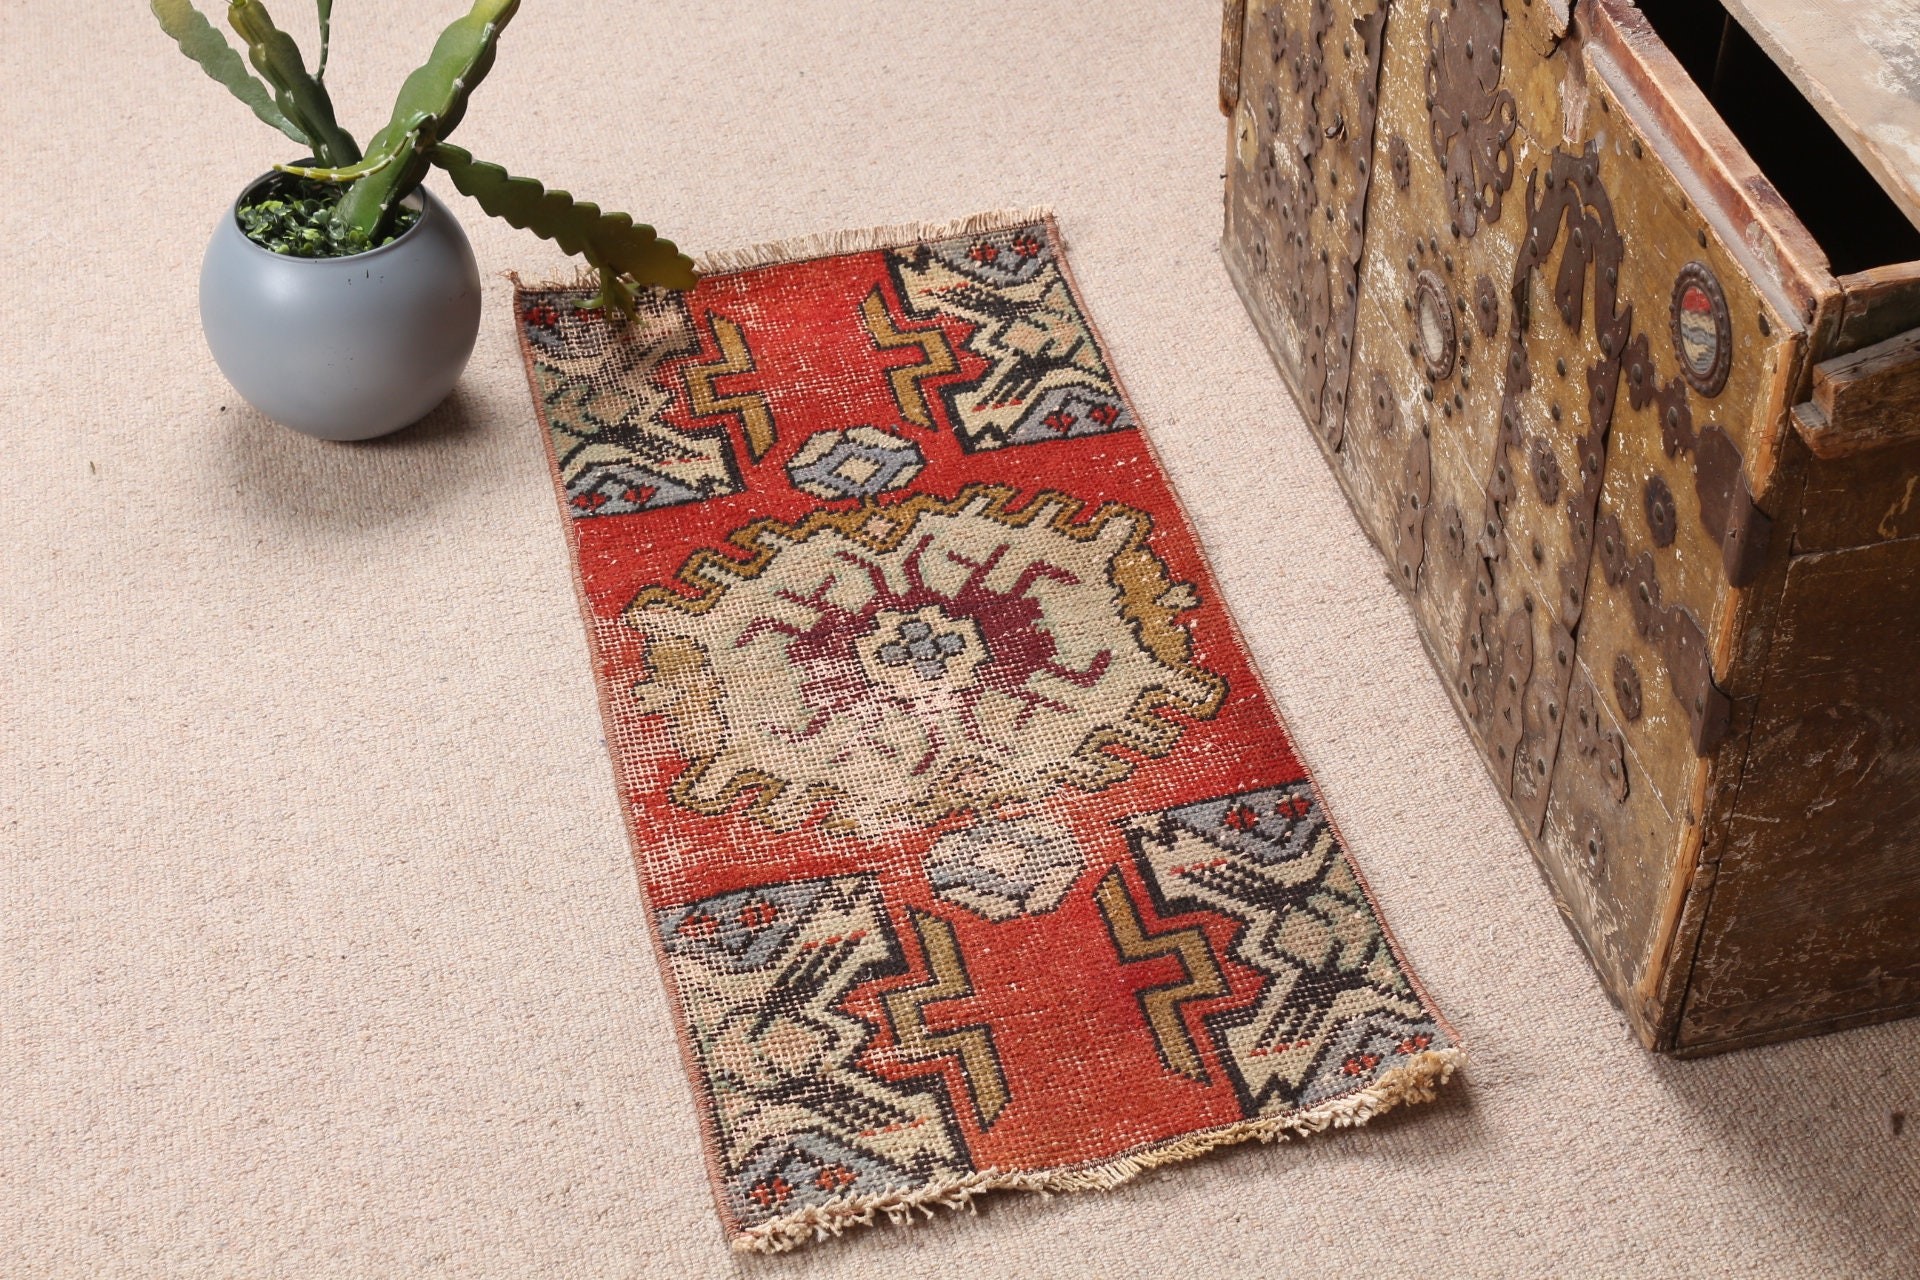 Rugs for Entry, Bathroom Rugs, Kitchen Rugs, 1.3x2.8 ft Small Rug, Turkish Rugs, Vintage Rugs, Cool Rugs, Red Wool Rug